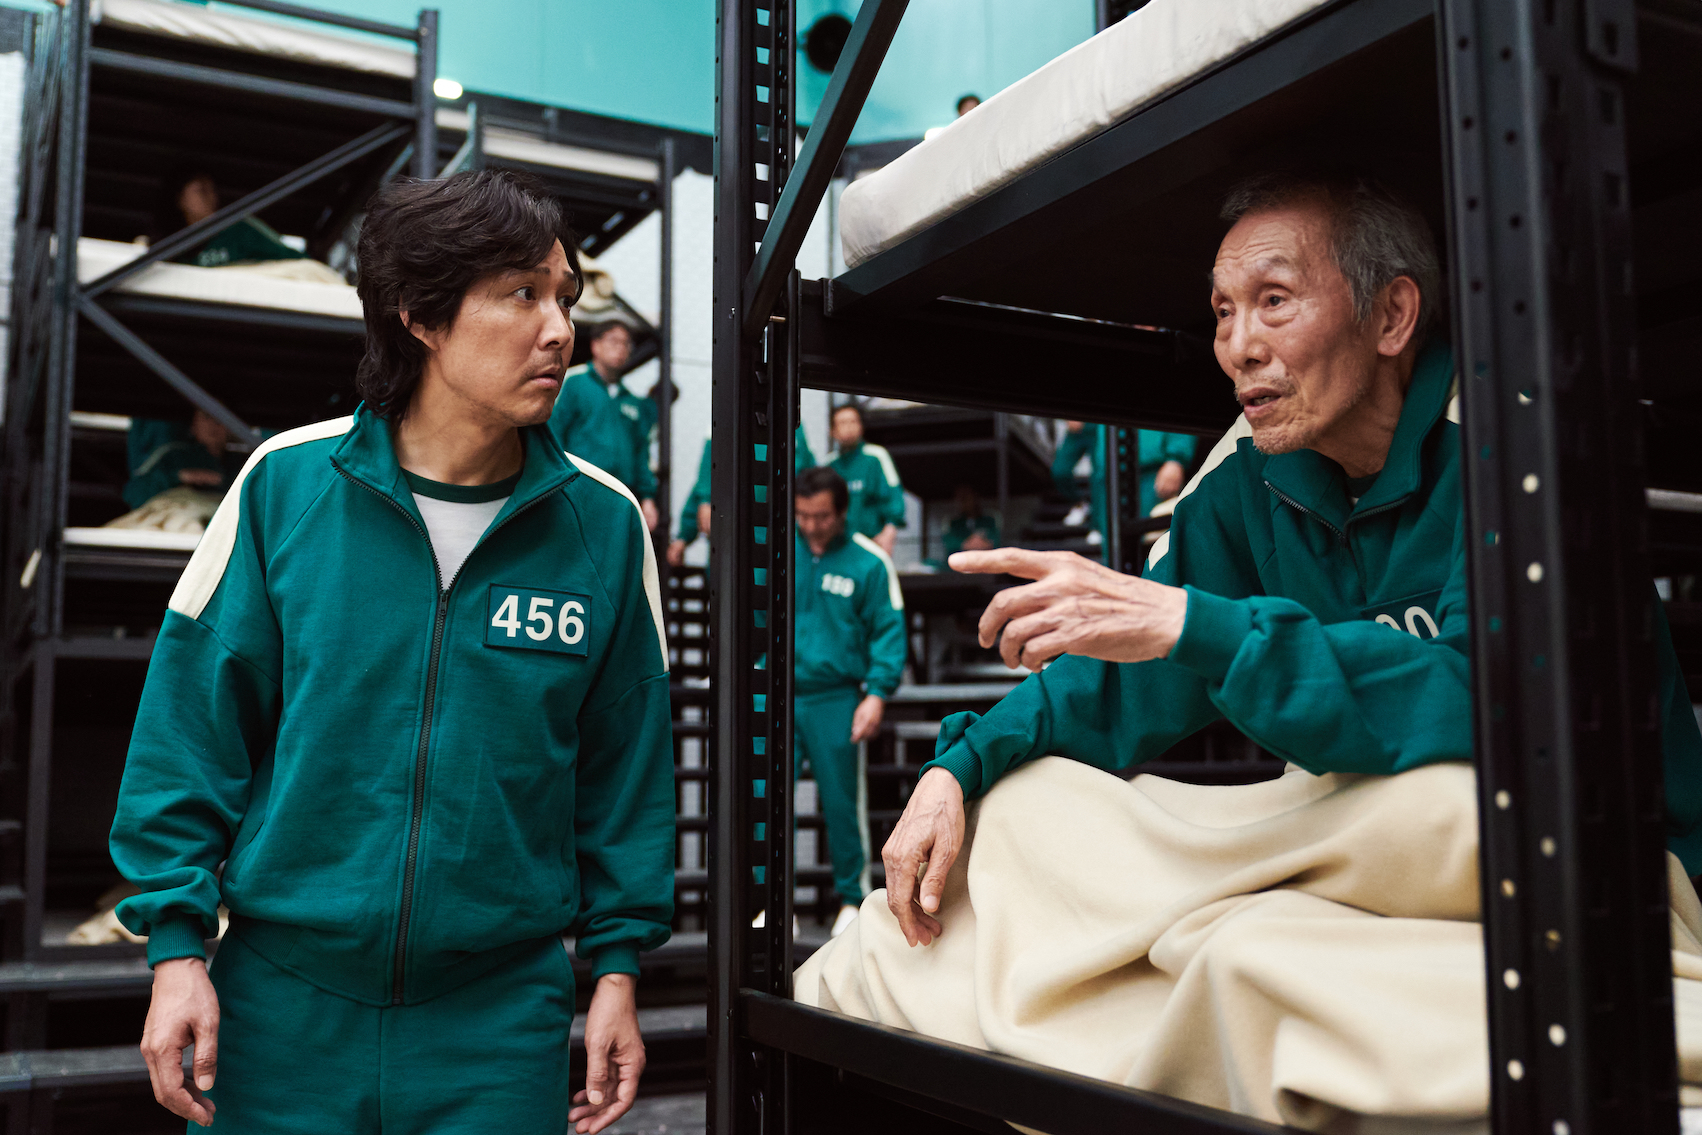 'Squid Game' cast members Lee Jung-jae and O Yeong-su talking while on the set. O Yeong-su is sitting in a bunk bed